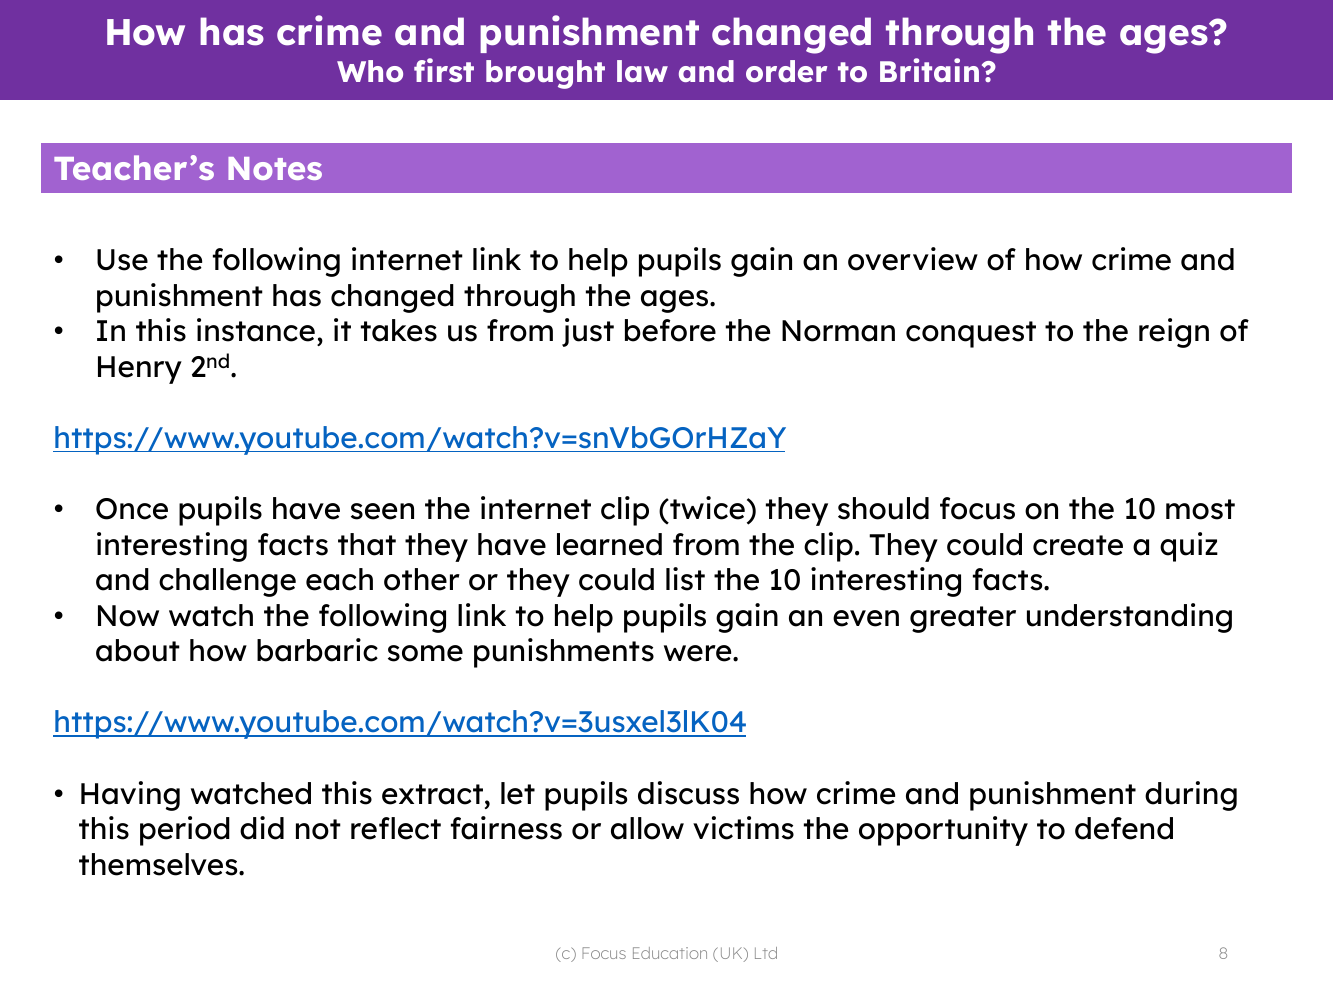 Who first brought law and order to Britain? - Teacher's notes